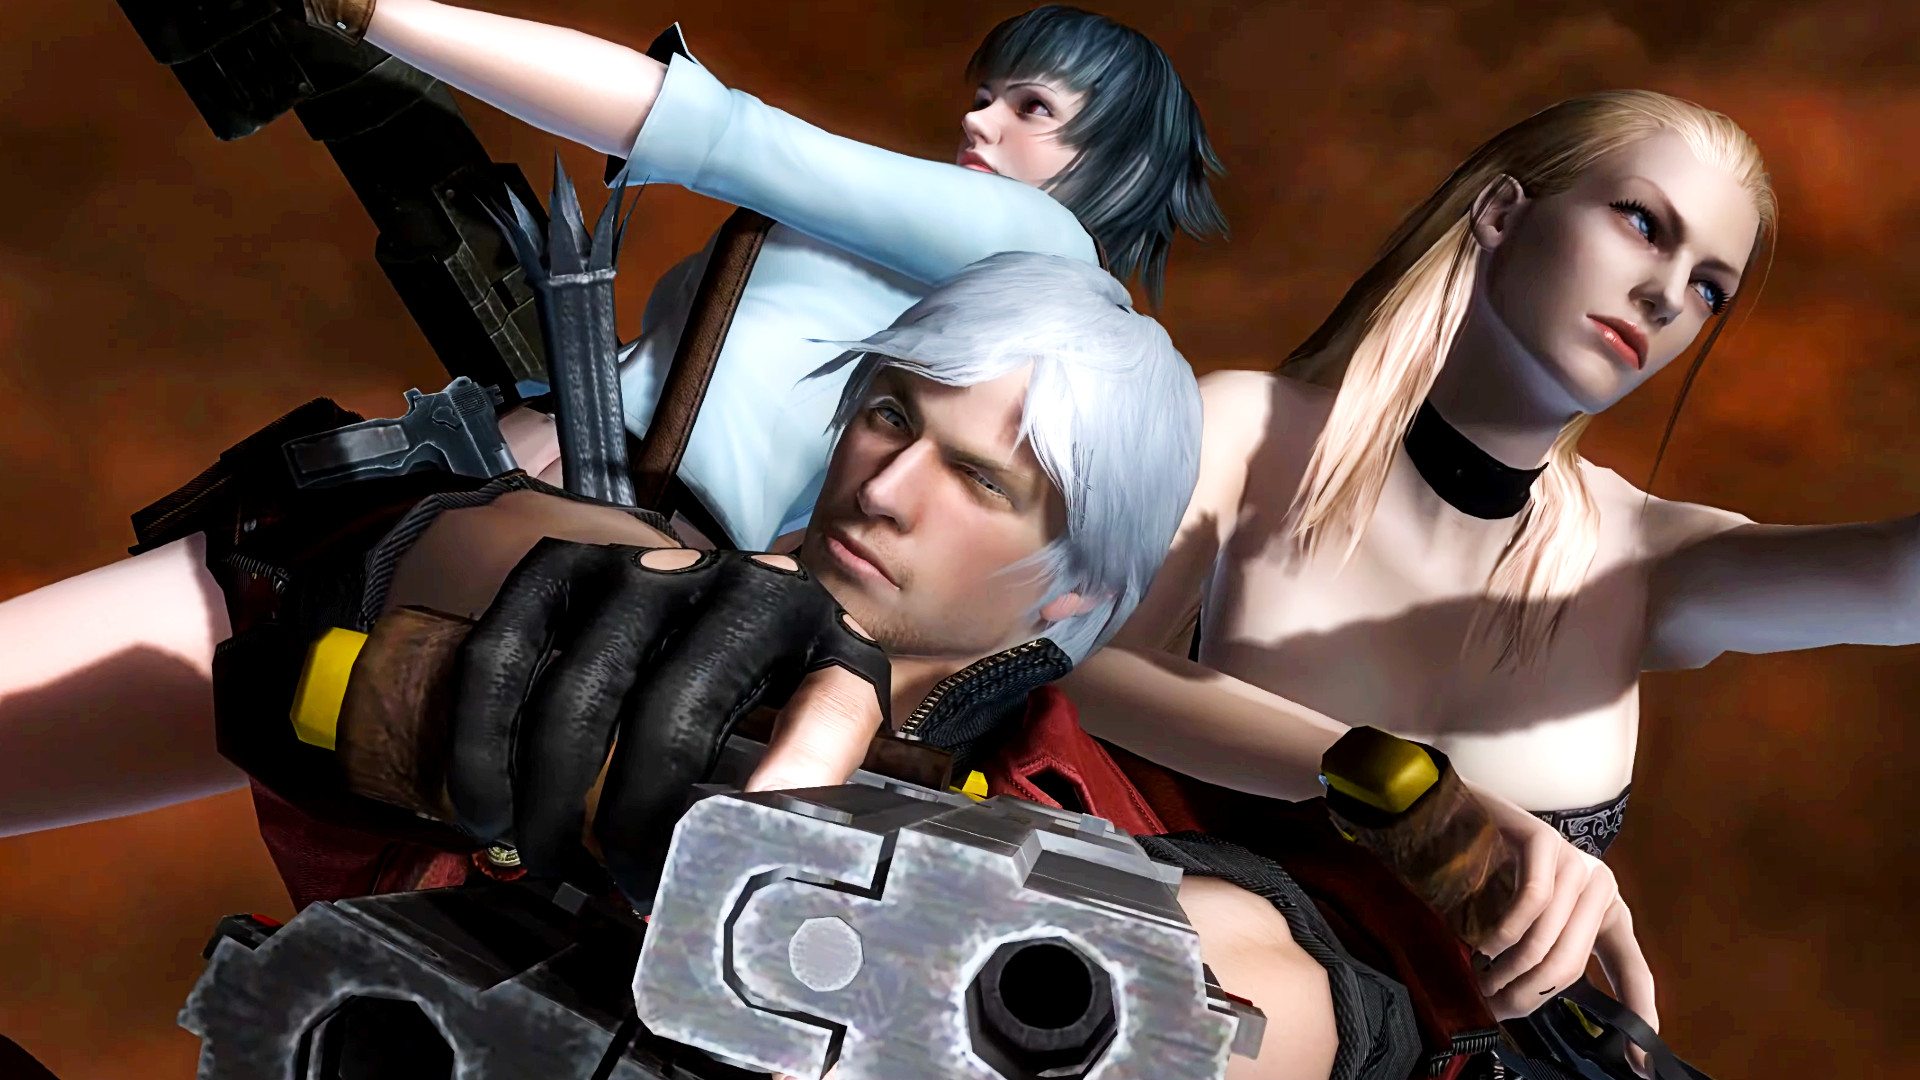 DmC Devil May Cry: Costume Pack on Steam